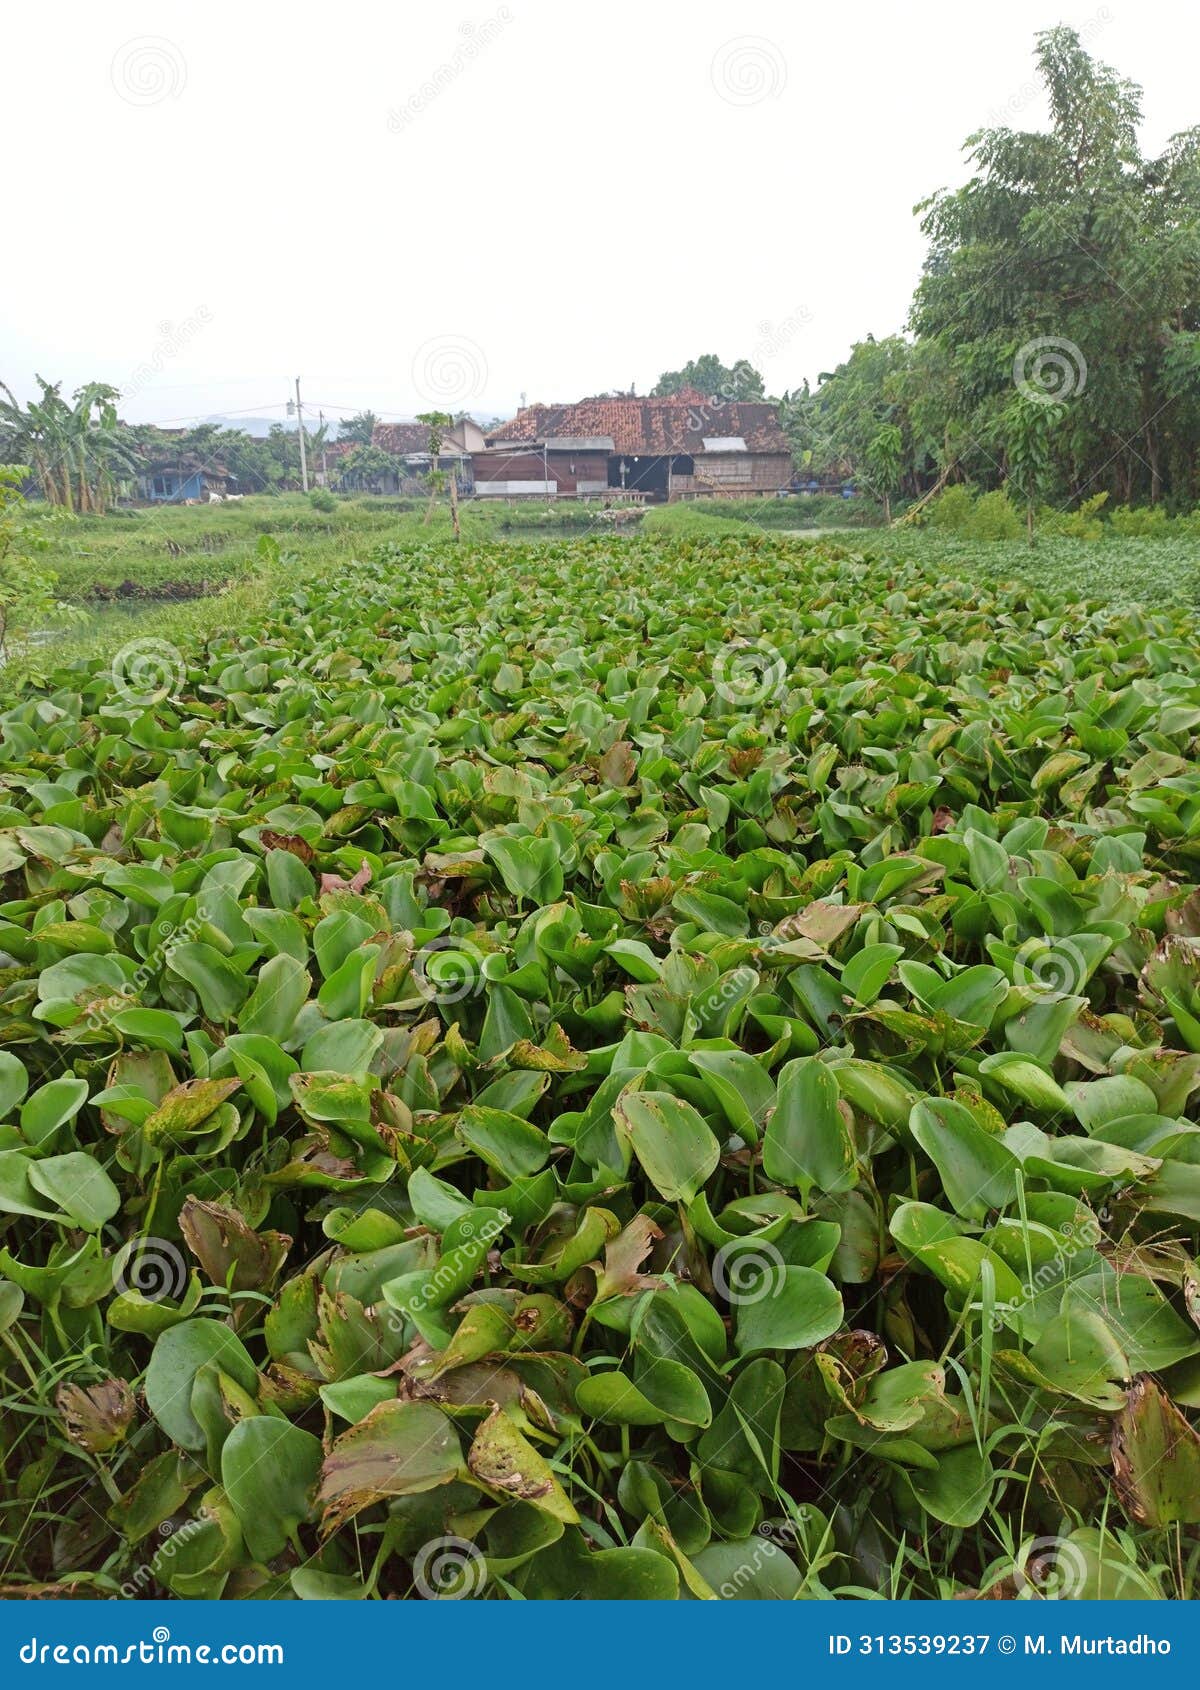 this is a type of plant that grows in fish ponds, namely centongan